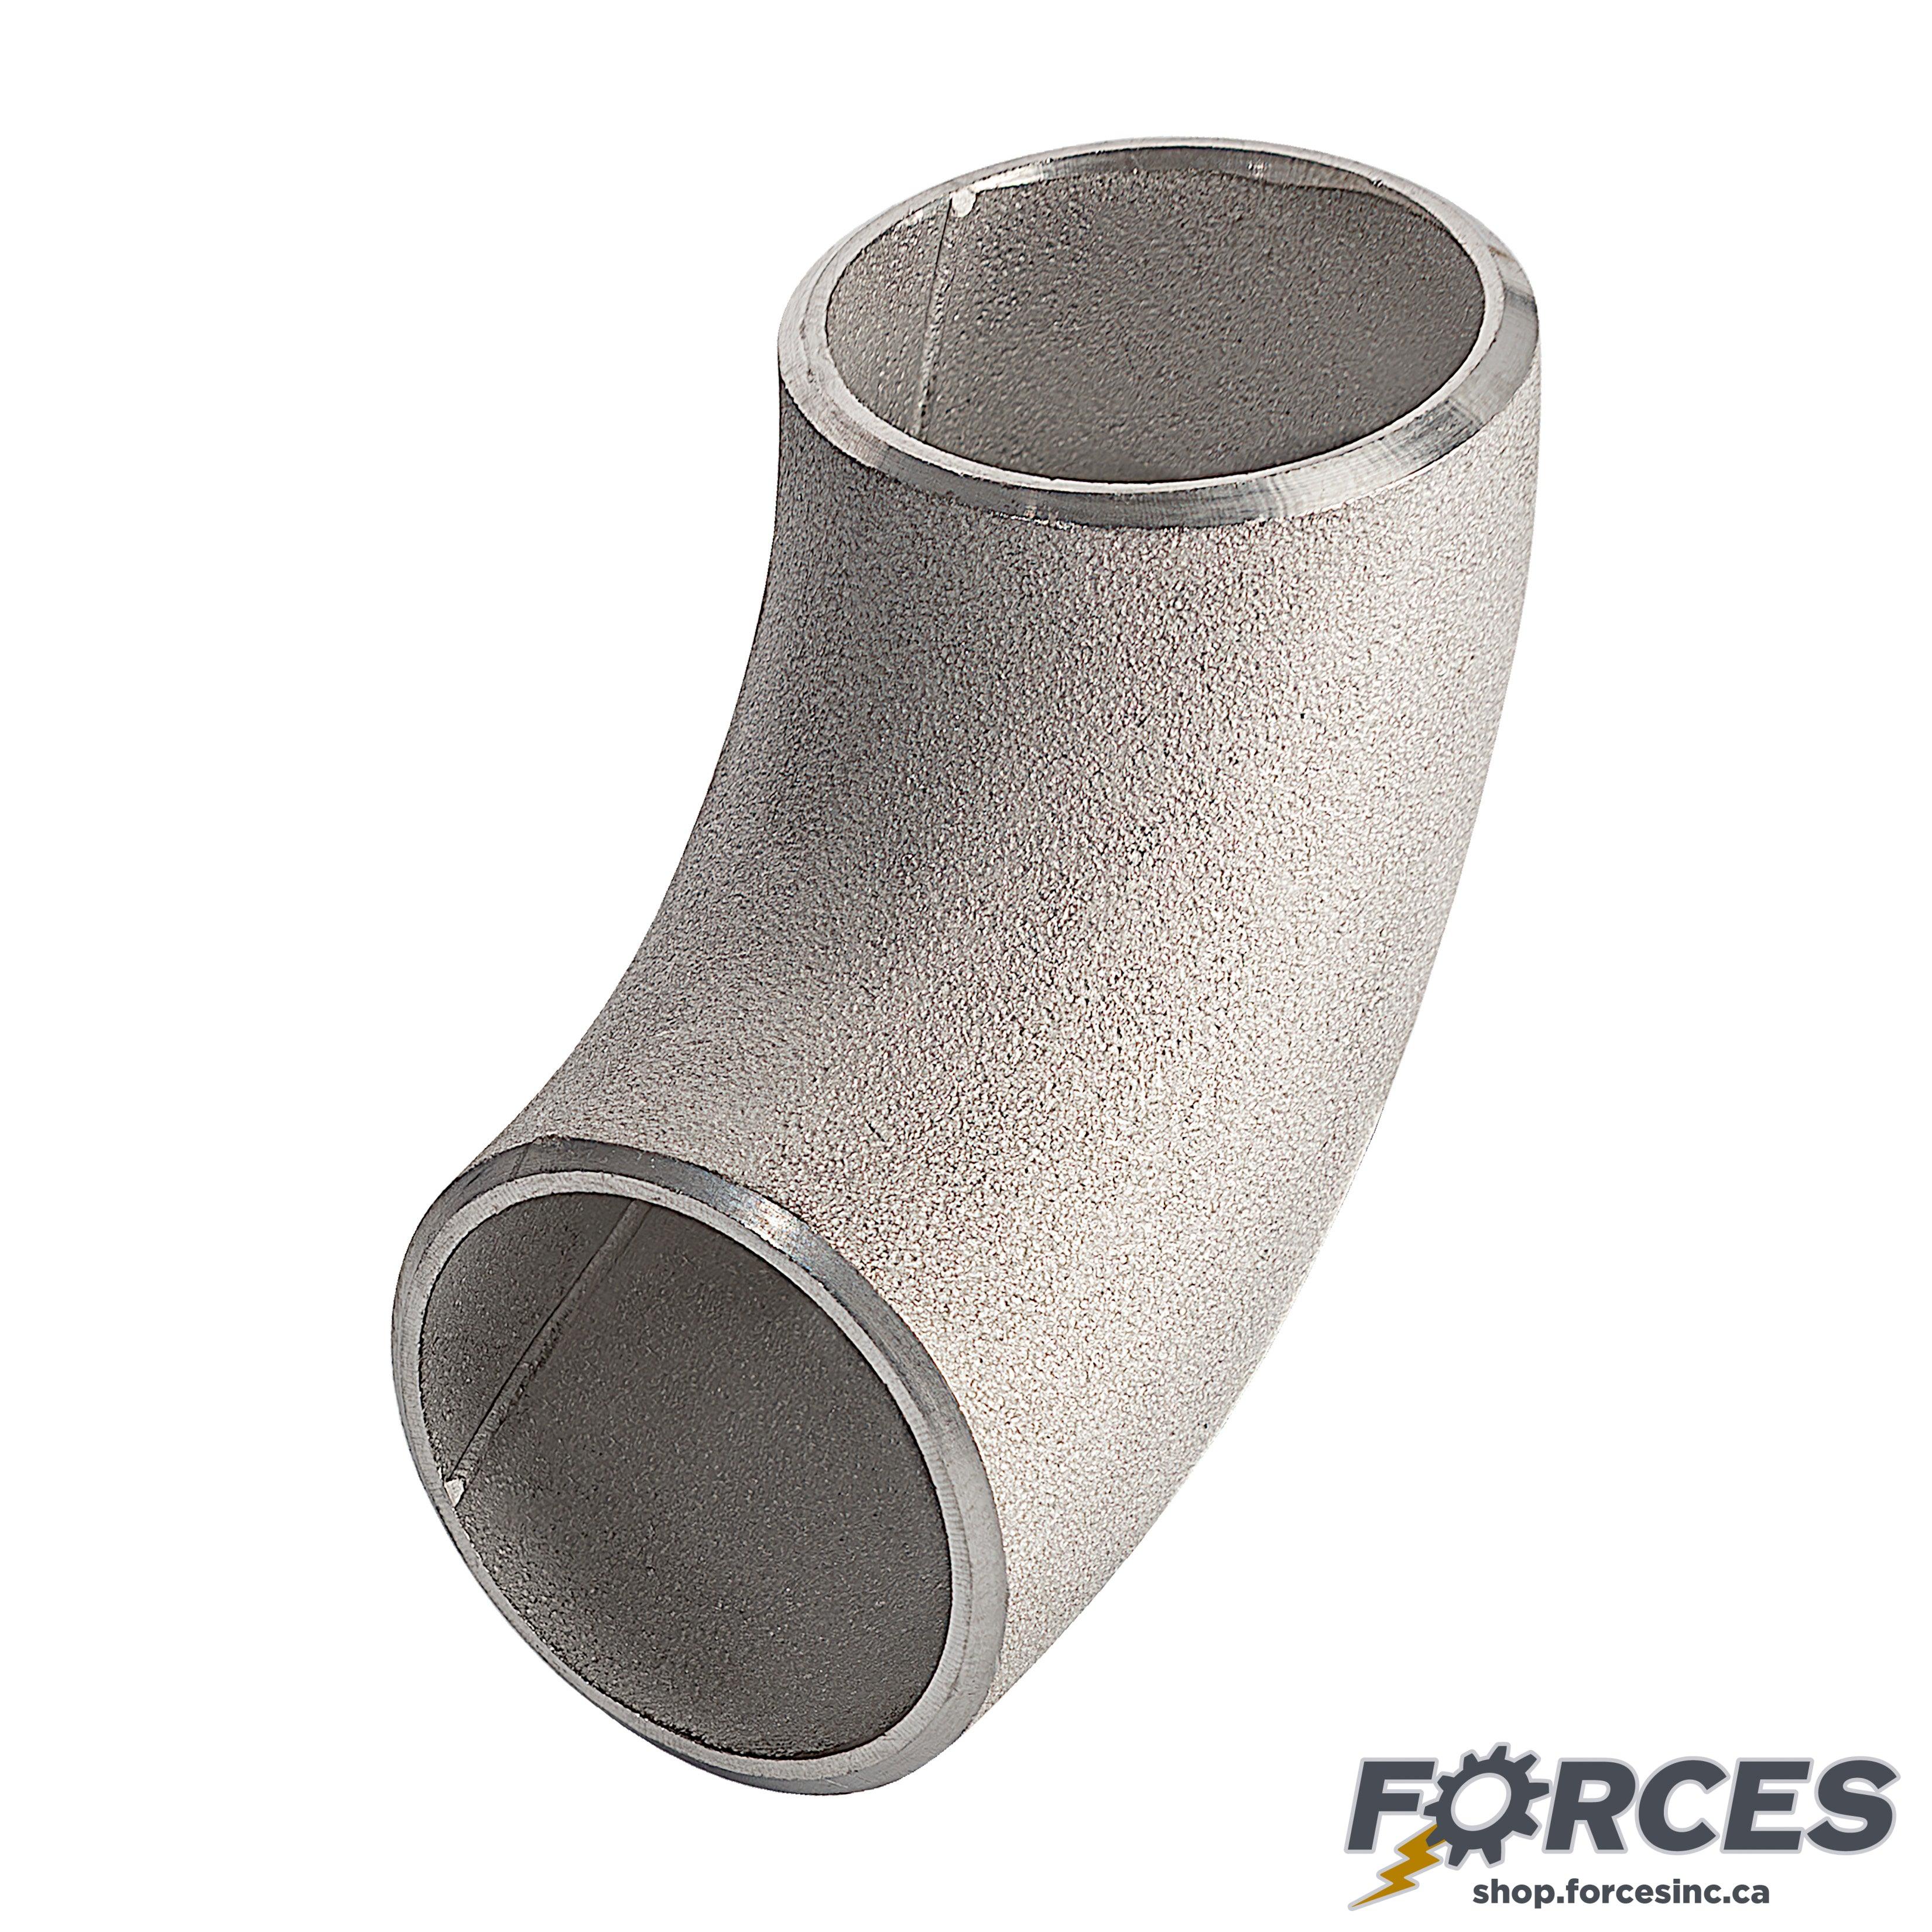 3/4" Elbow 90° SCH 40 Butt Weld - Stainless Steel 316 - Forces Inc